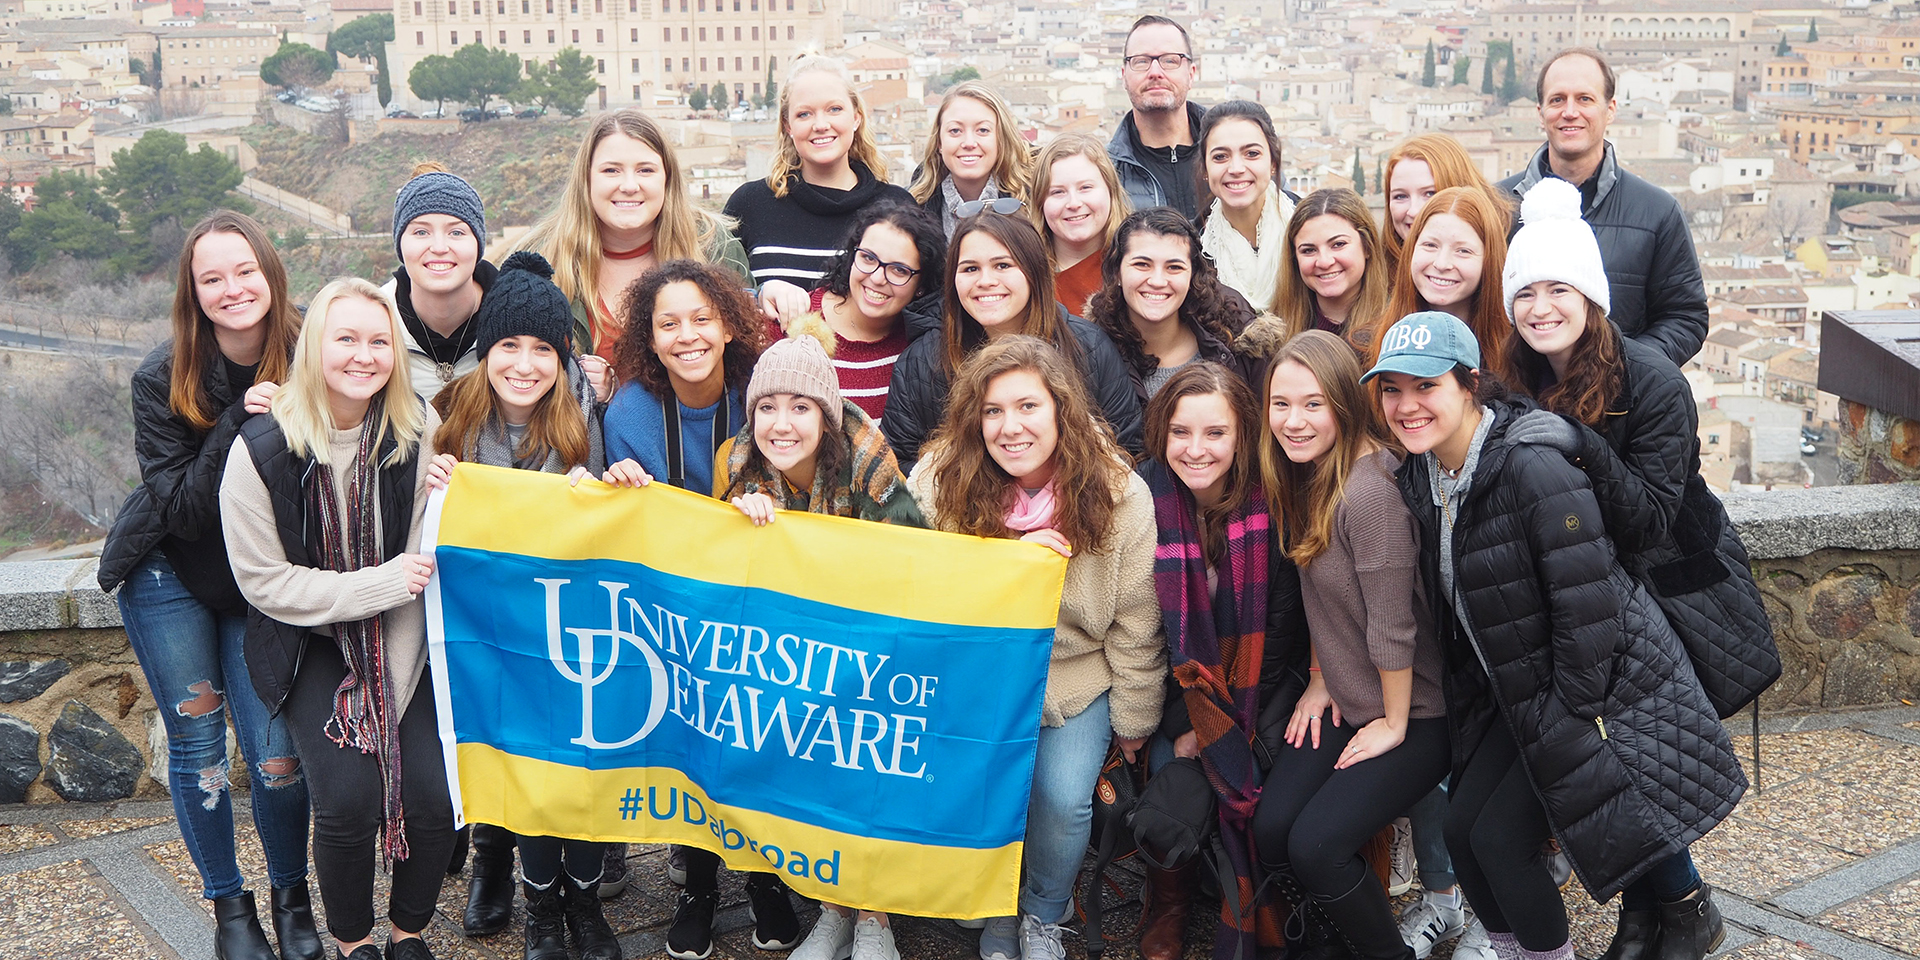 UD students in Spain